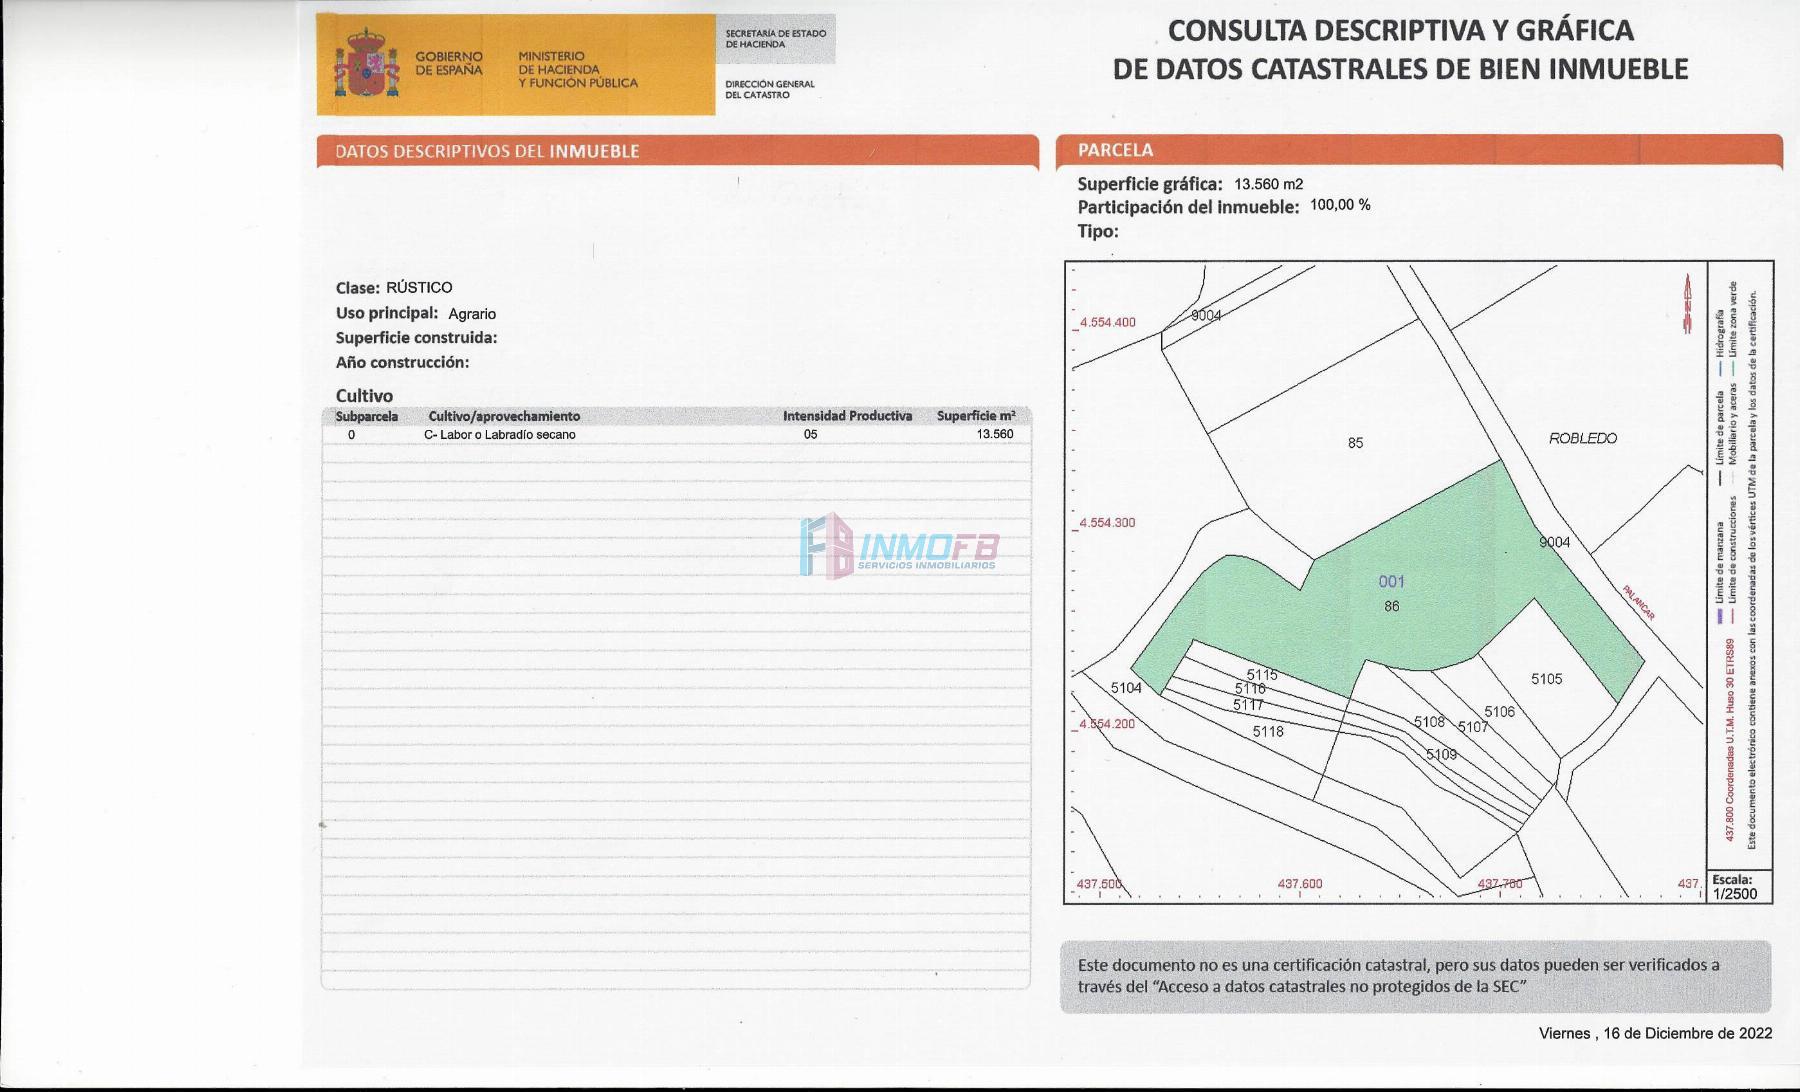 For sale of land in Arcones